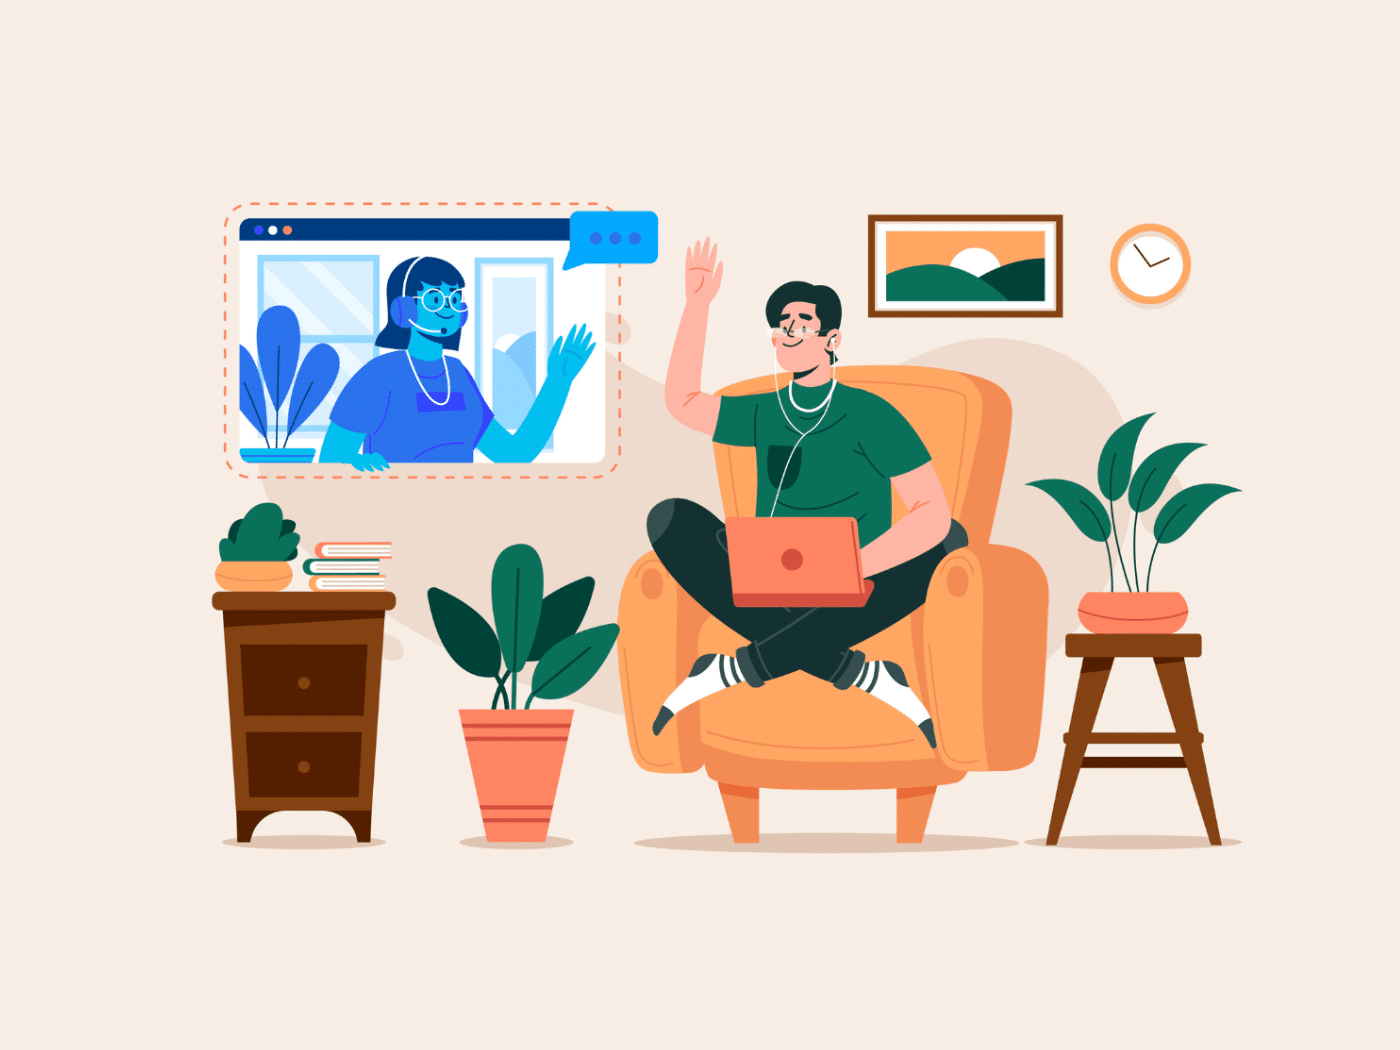 Best Practices for Managing Remote Teams